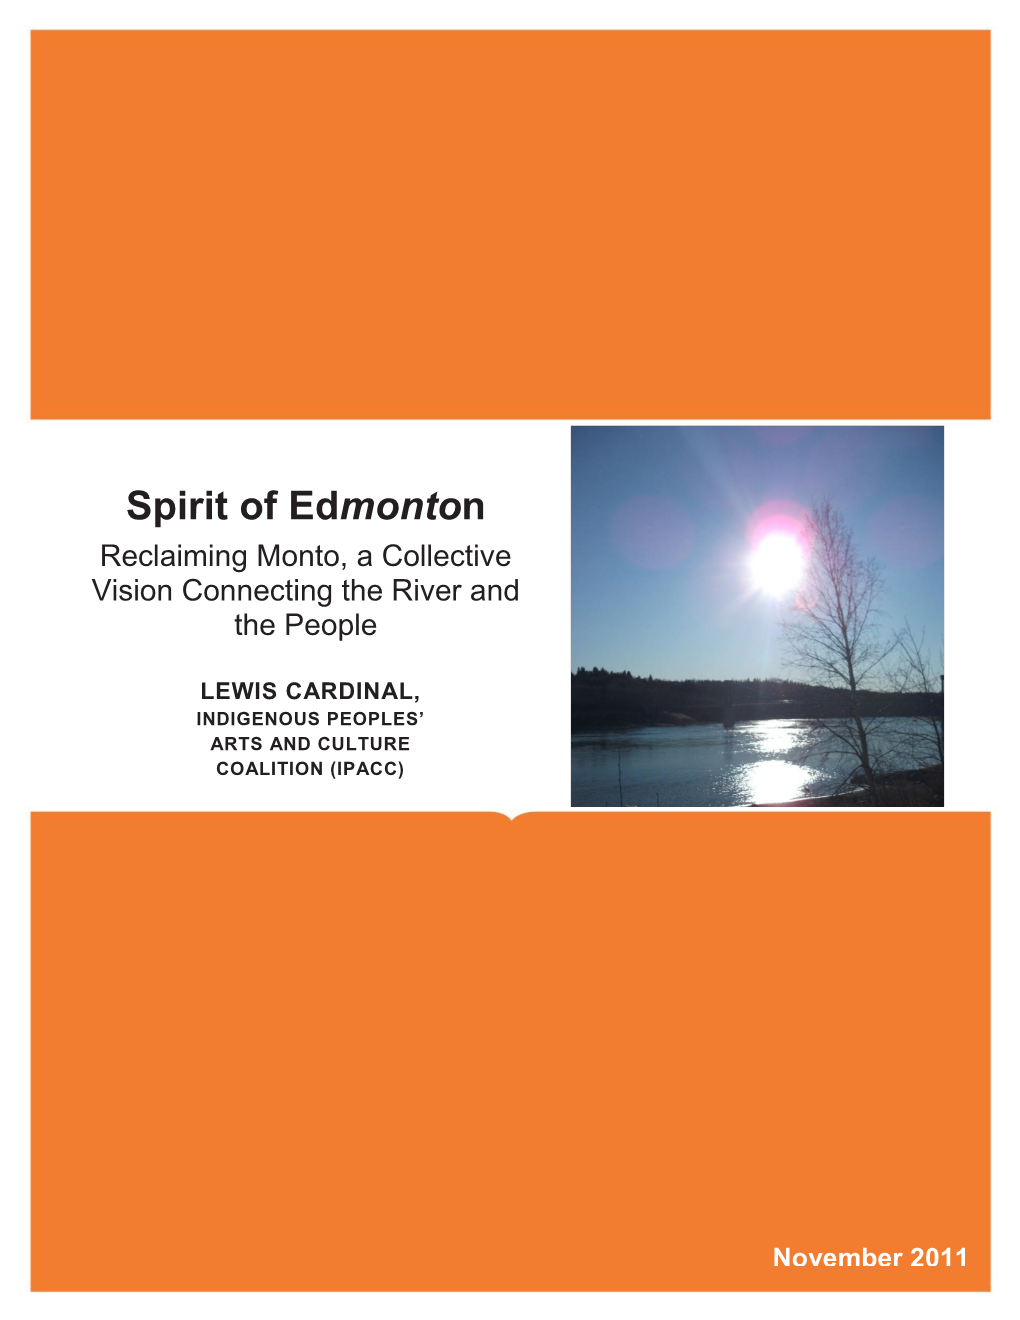 Spirit of Edmonton Reclaiming Monto, a Collective Vision Connecting the River and the People